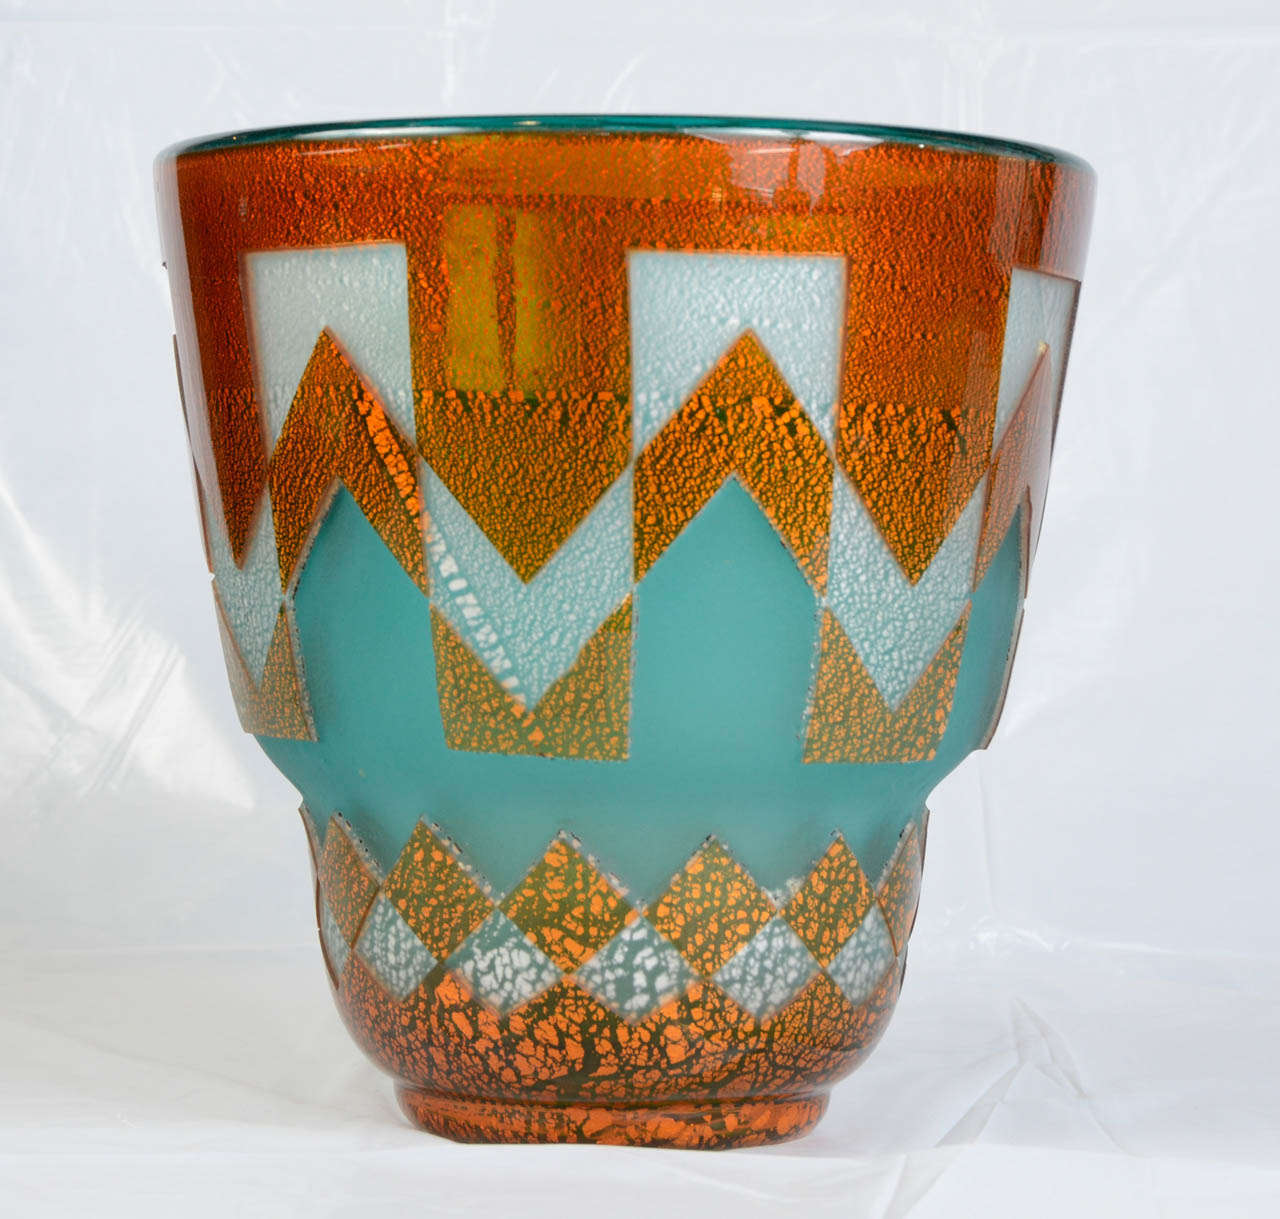 Large Art Deco vase in colored glass. Engraved and carved with gold insets. Orange, blue, grey and gold color. Attributed to Daum. Not signed. Marks seen on the photos are not cracks but lines on the glass mass.